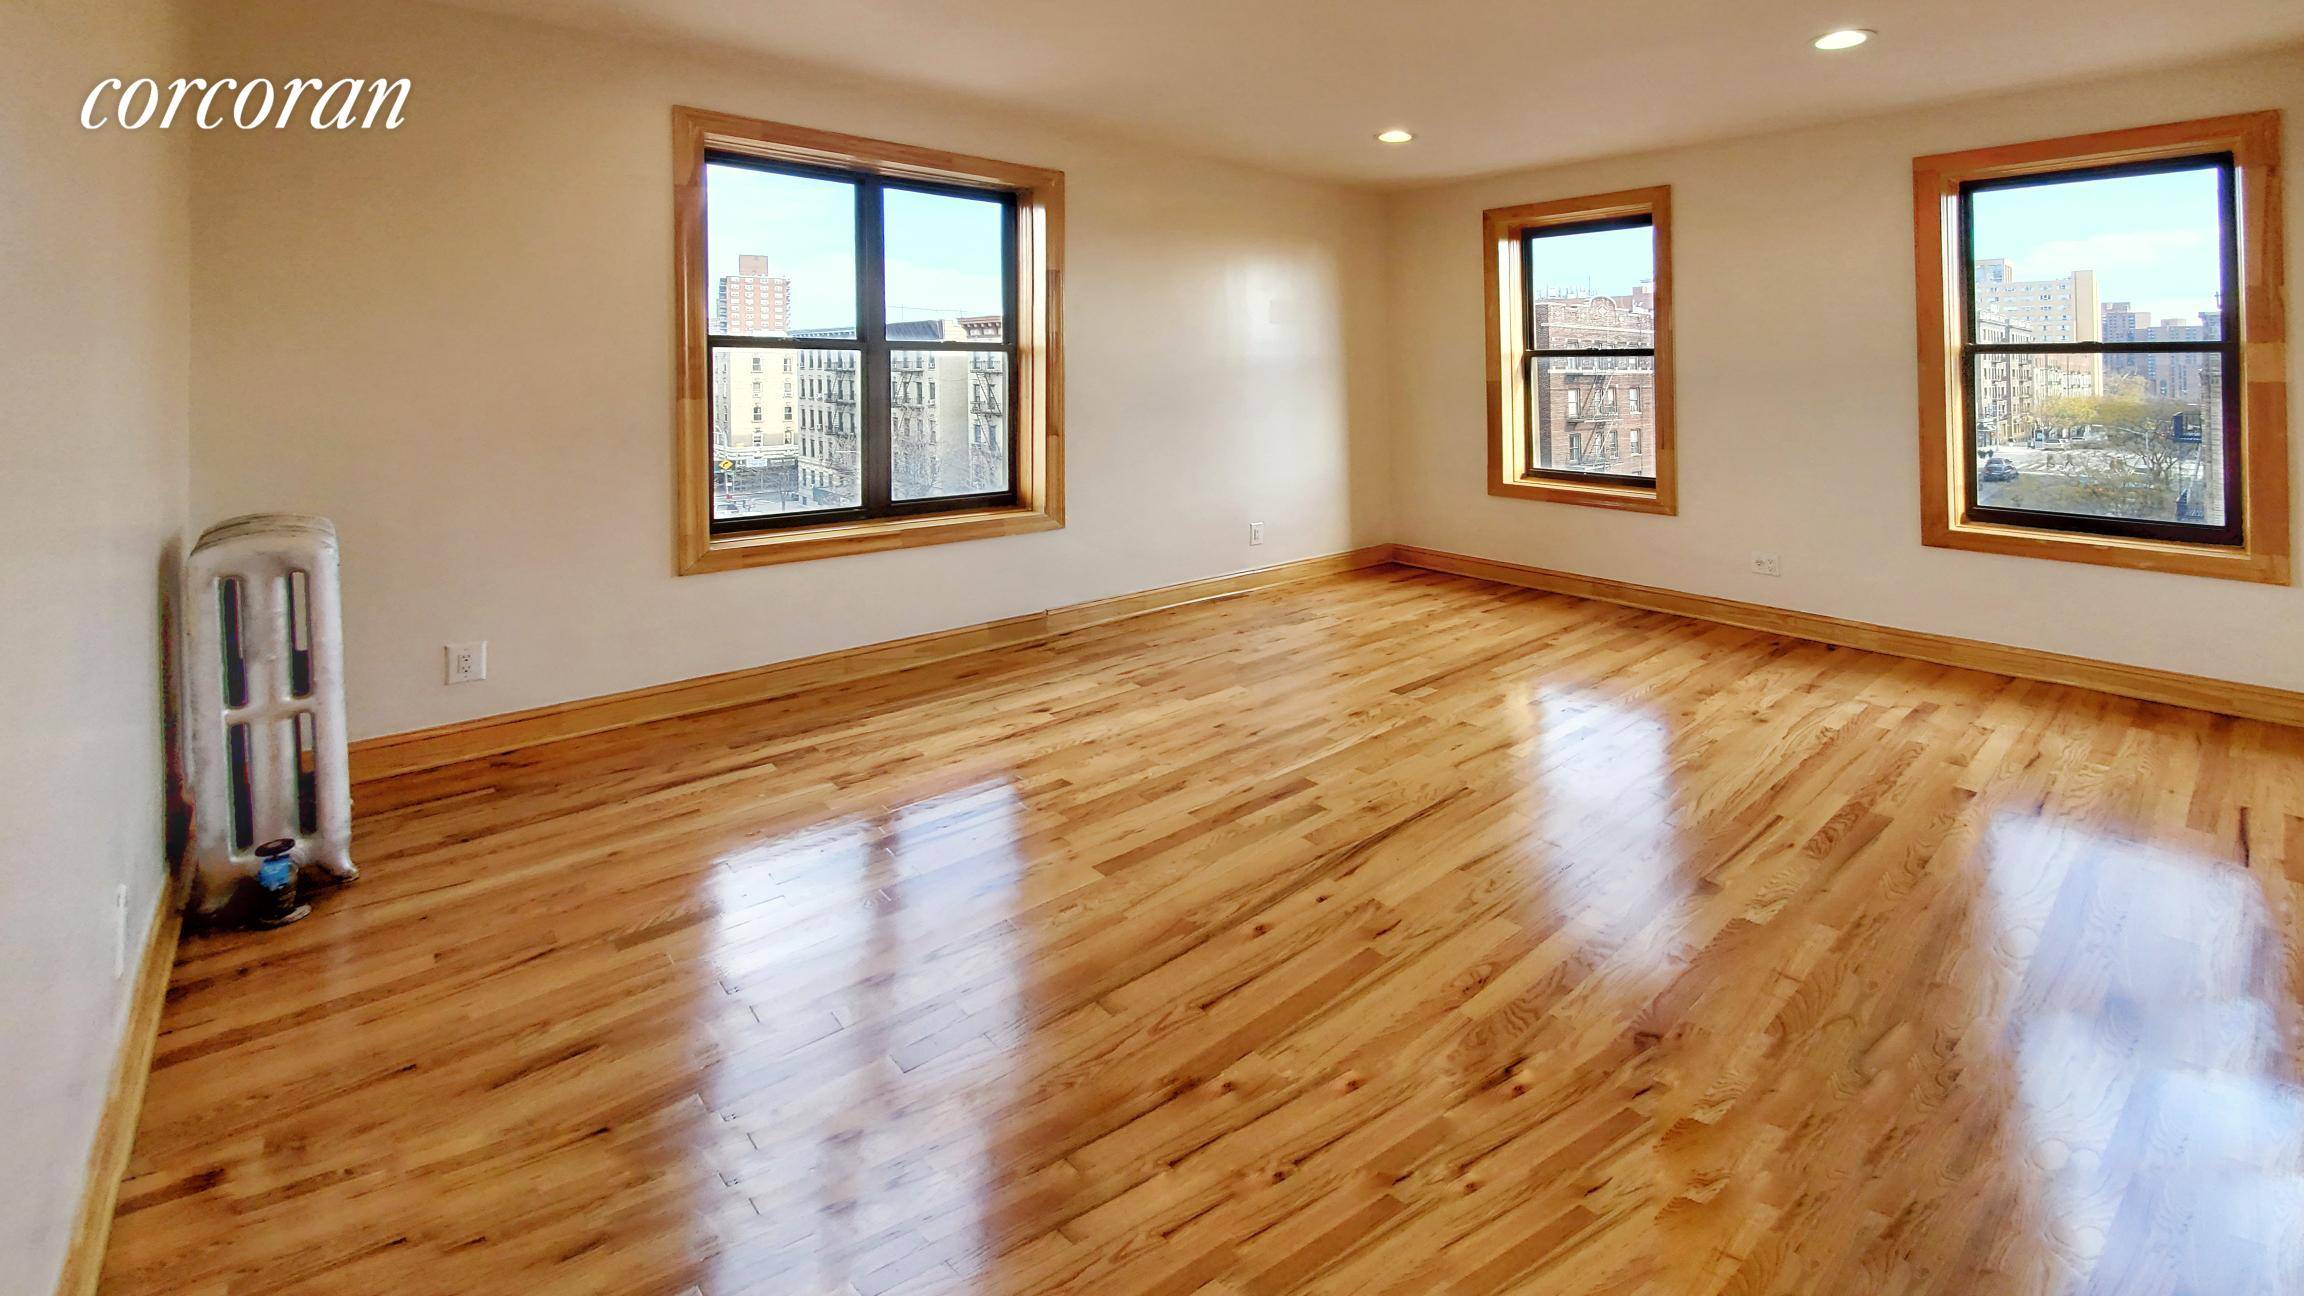 330 Wadsworth Avenue, Apartment 6A is an enormous, newly renovated true 4 bedroom apartment with impressive park views located in prime Washington Heights.